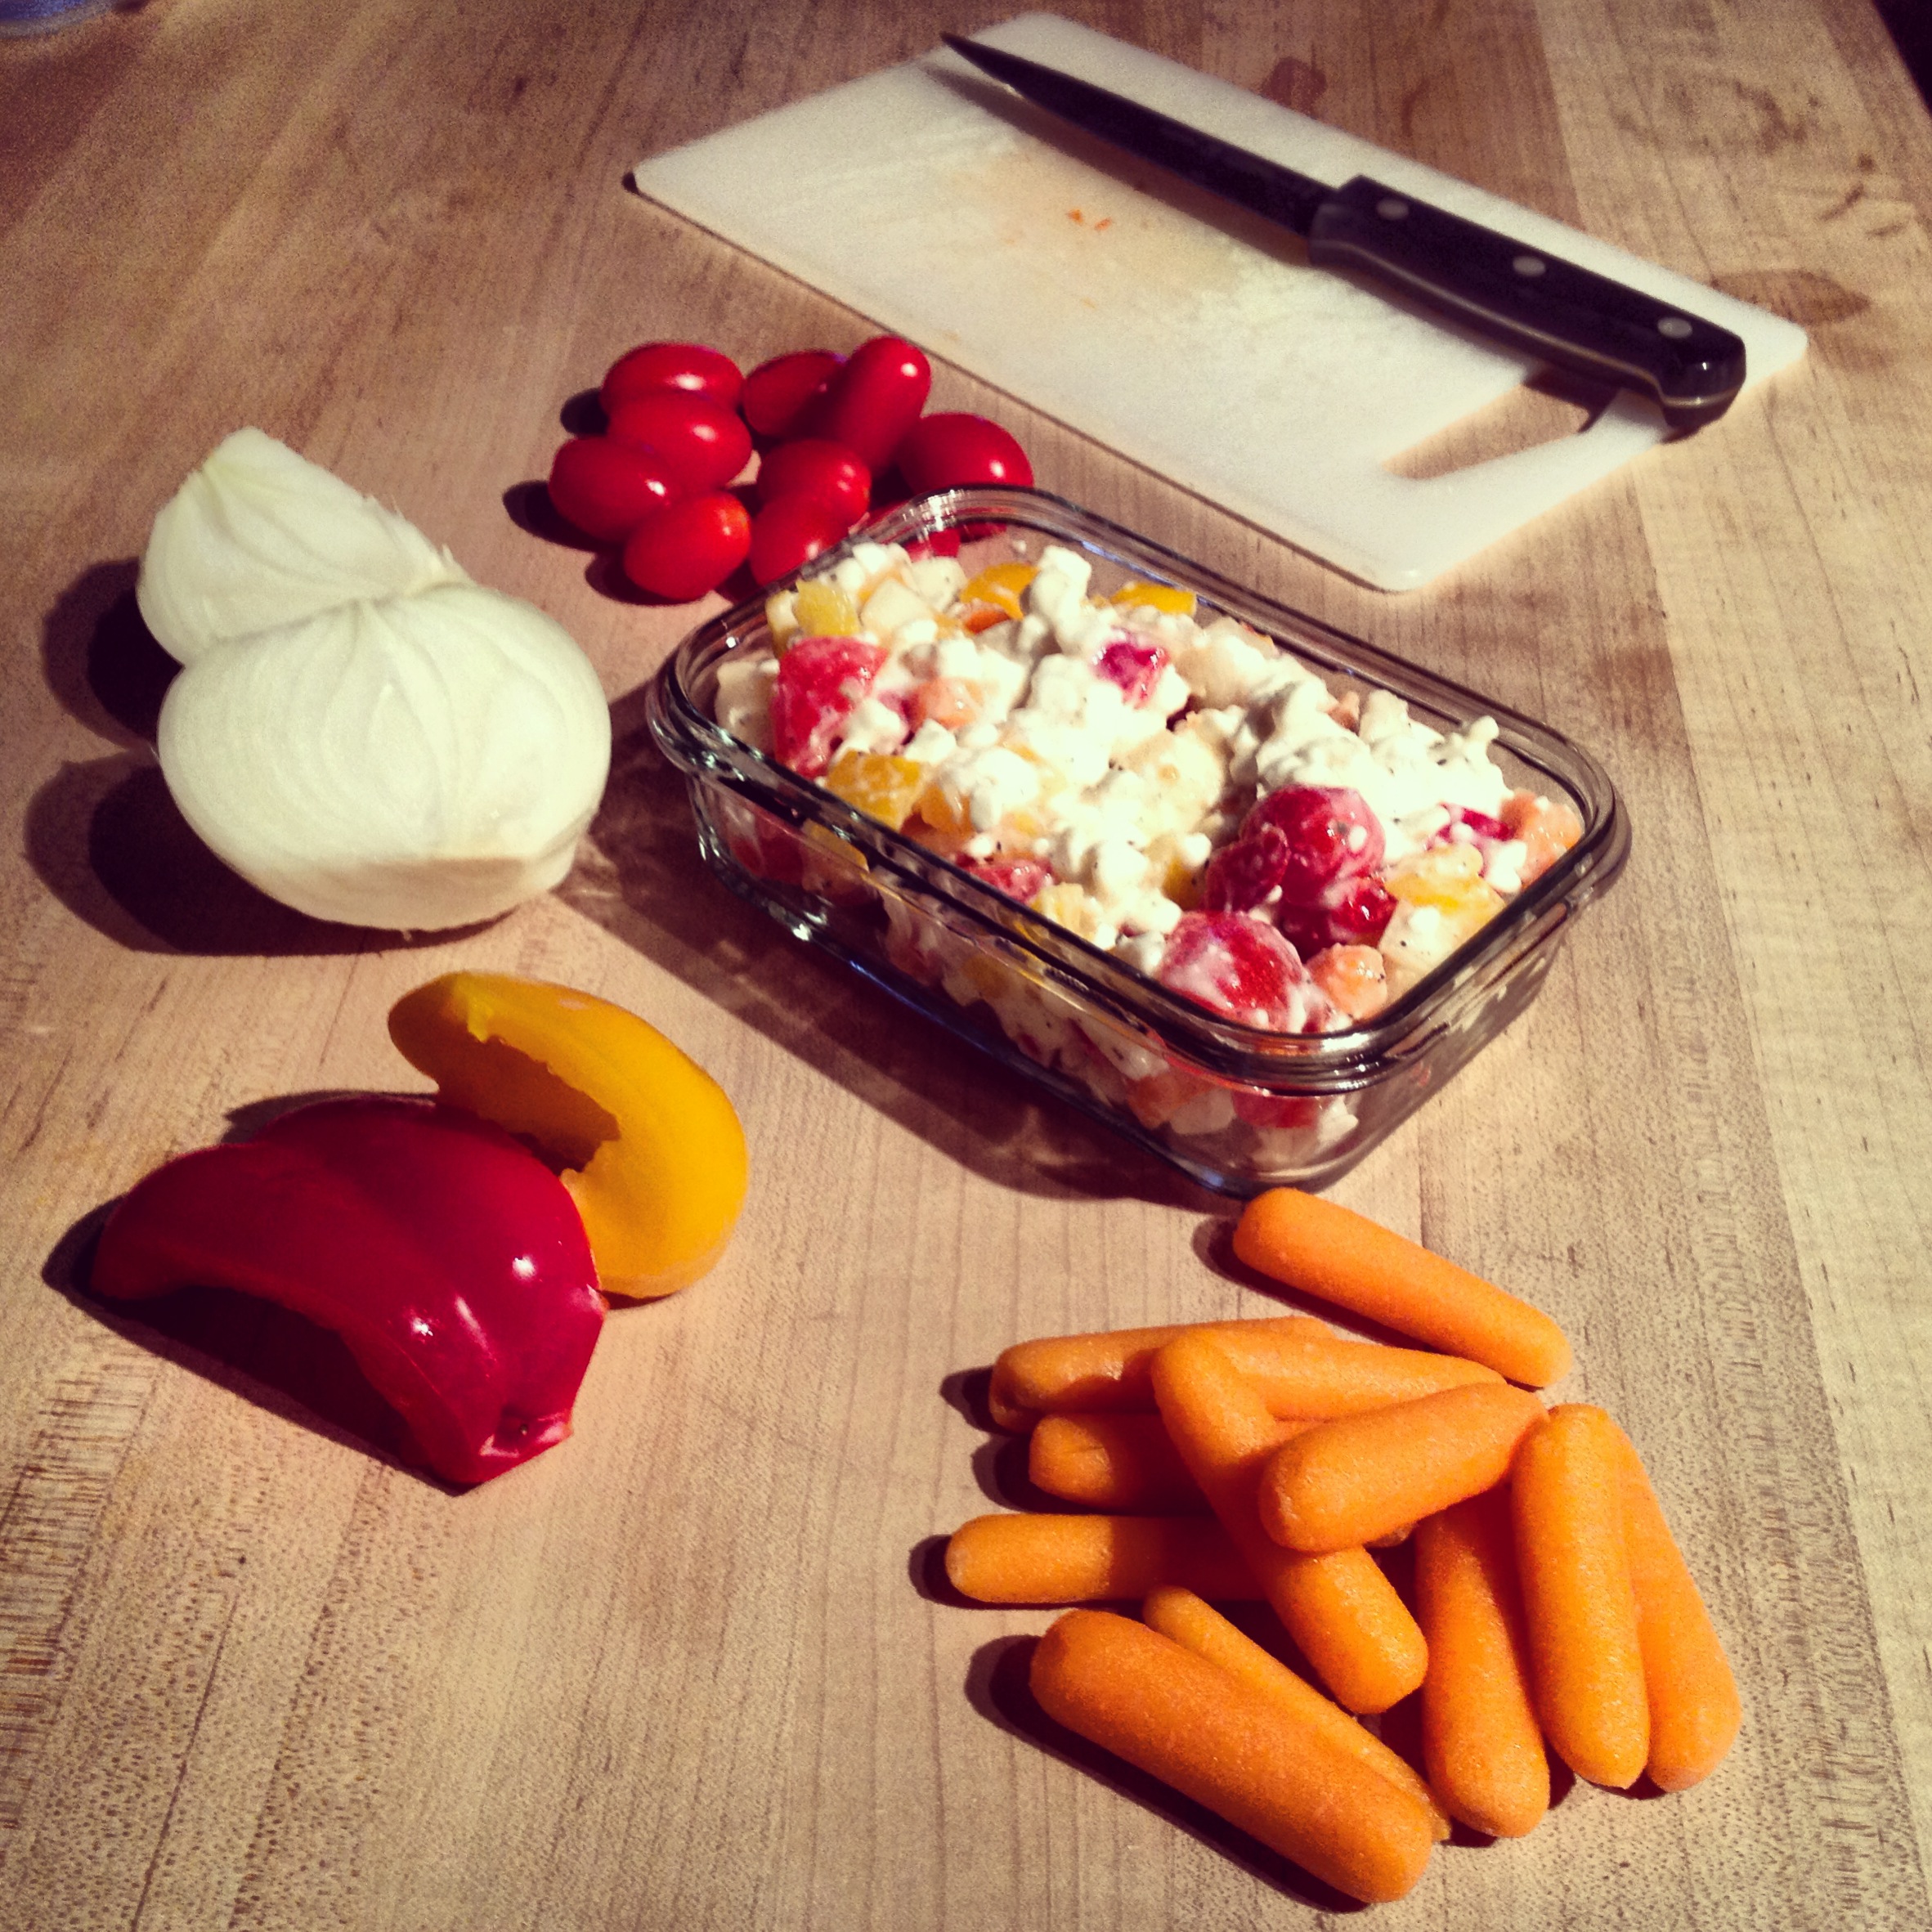 Meal planning for tomorrow: savoury cottage cheese